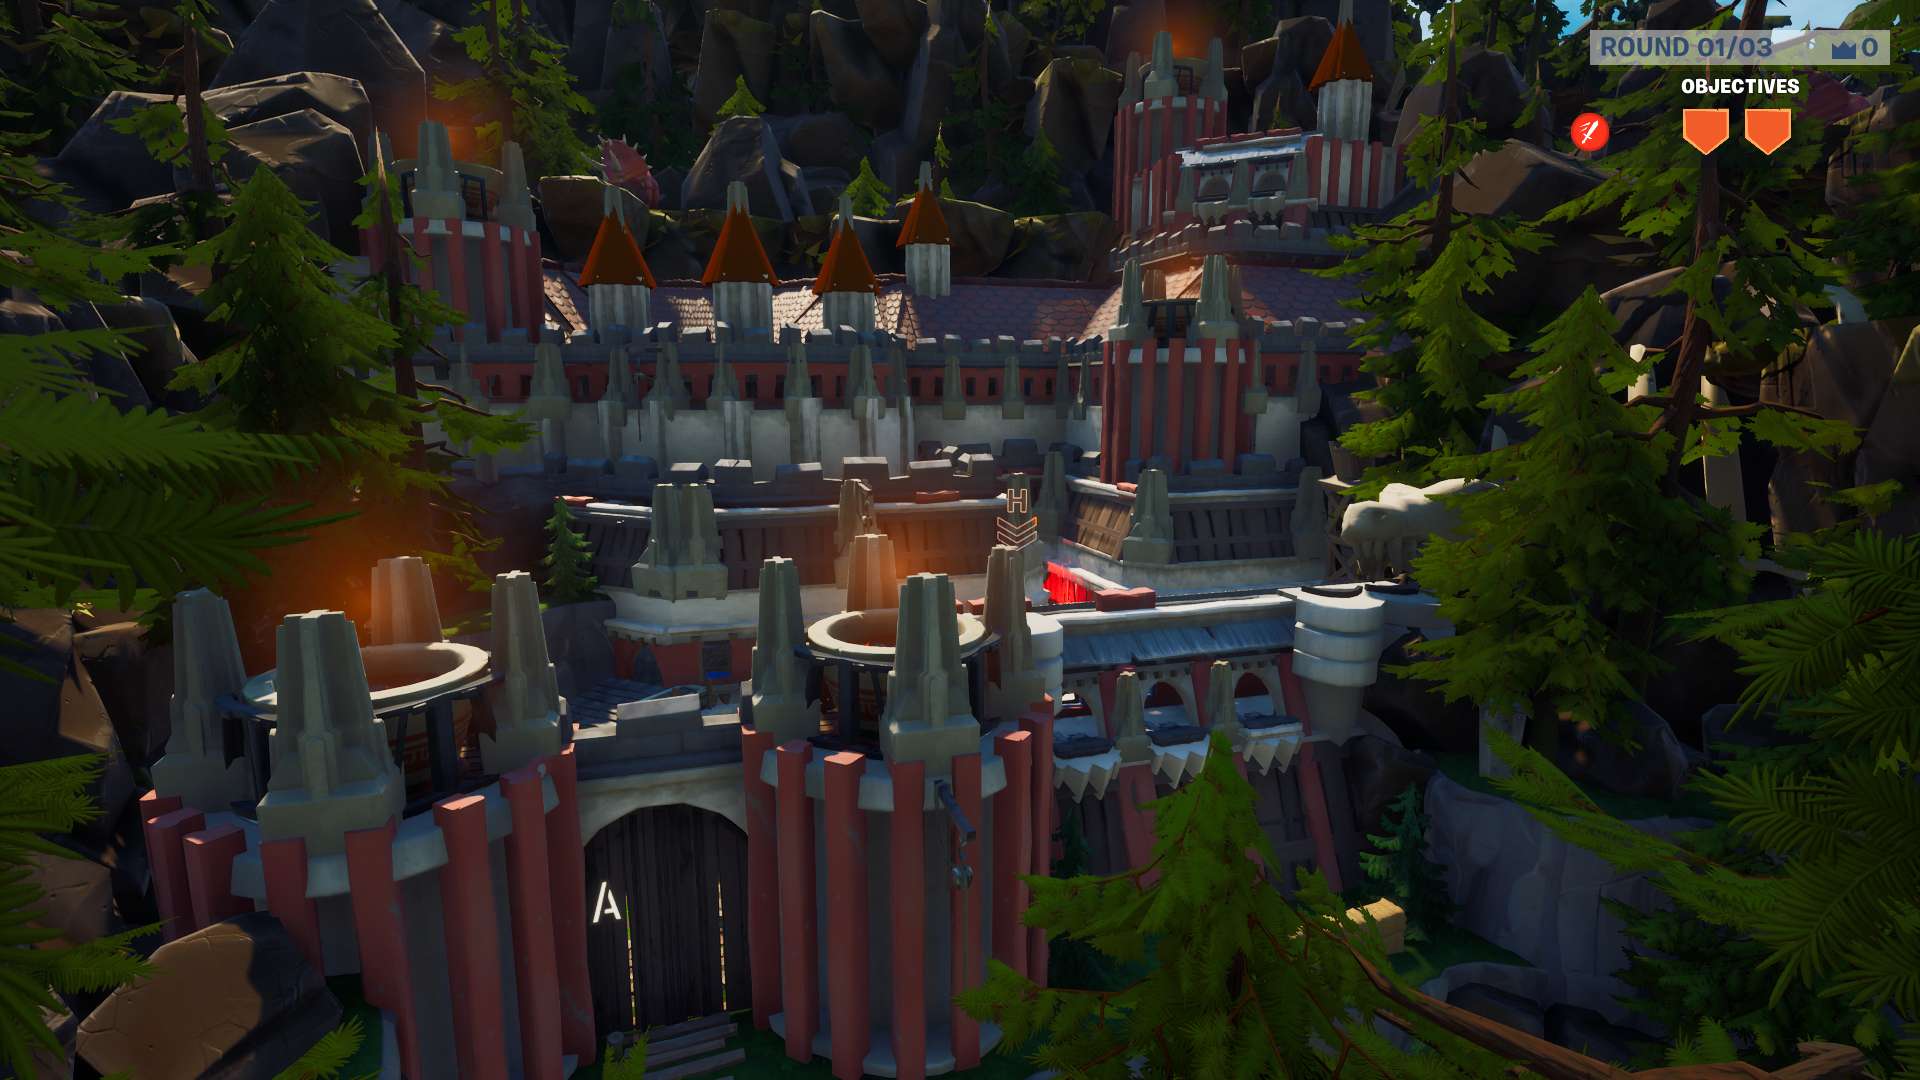 🏰 Castle Wars ☠️ - Fortnite Creative Team Deathmatch and Tycoon Map Code